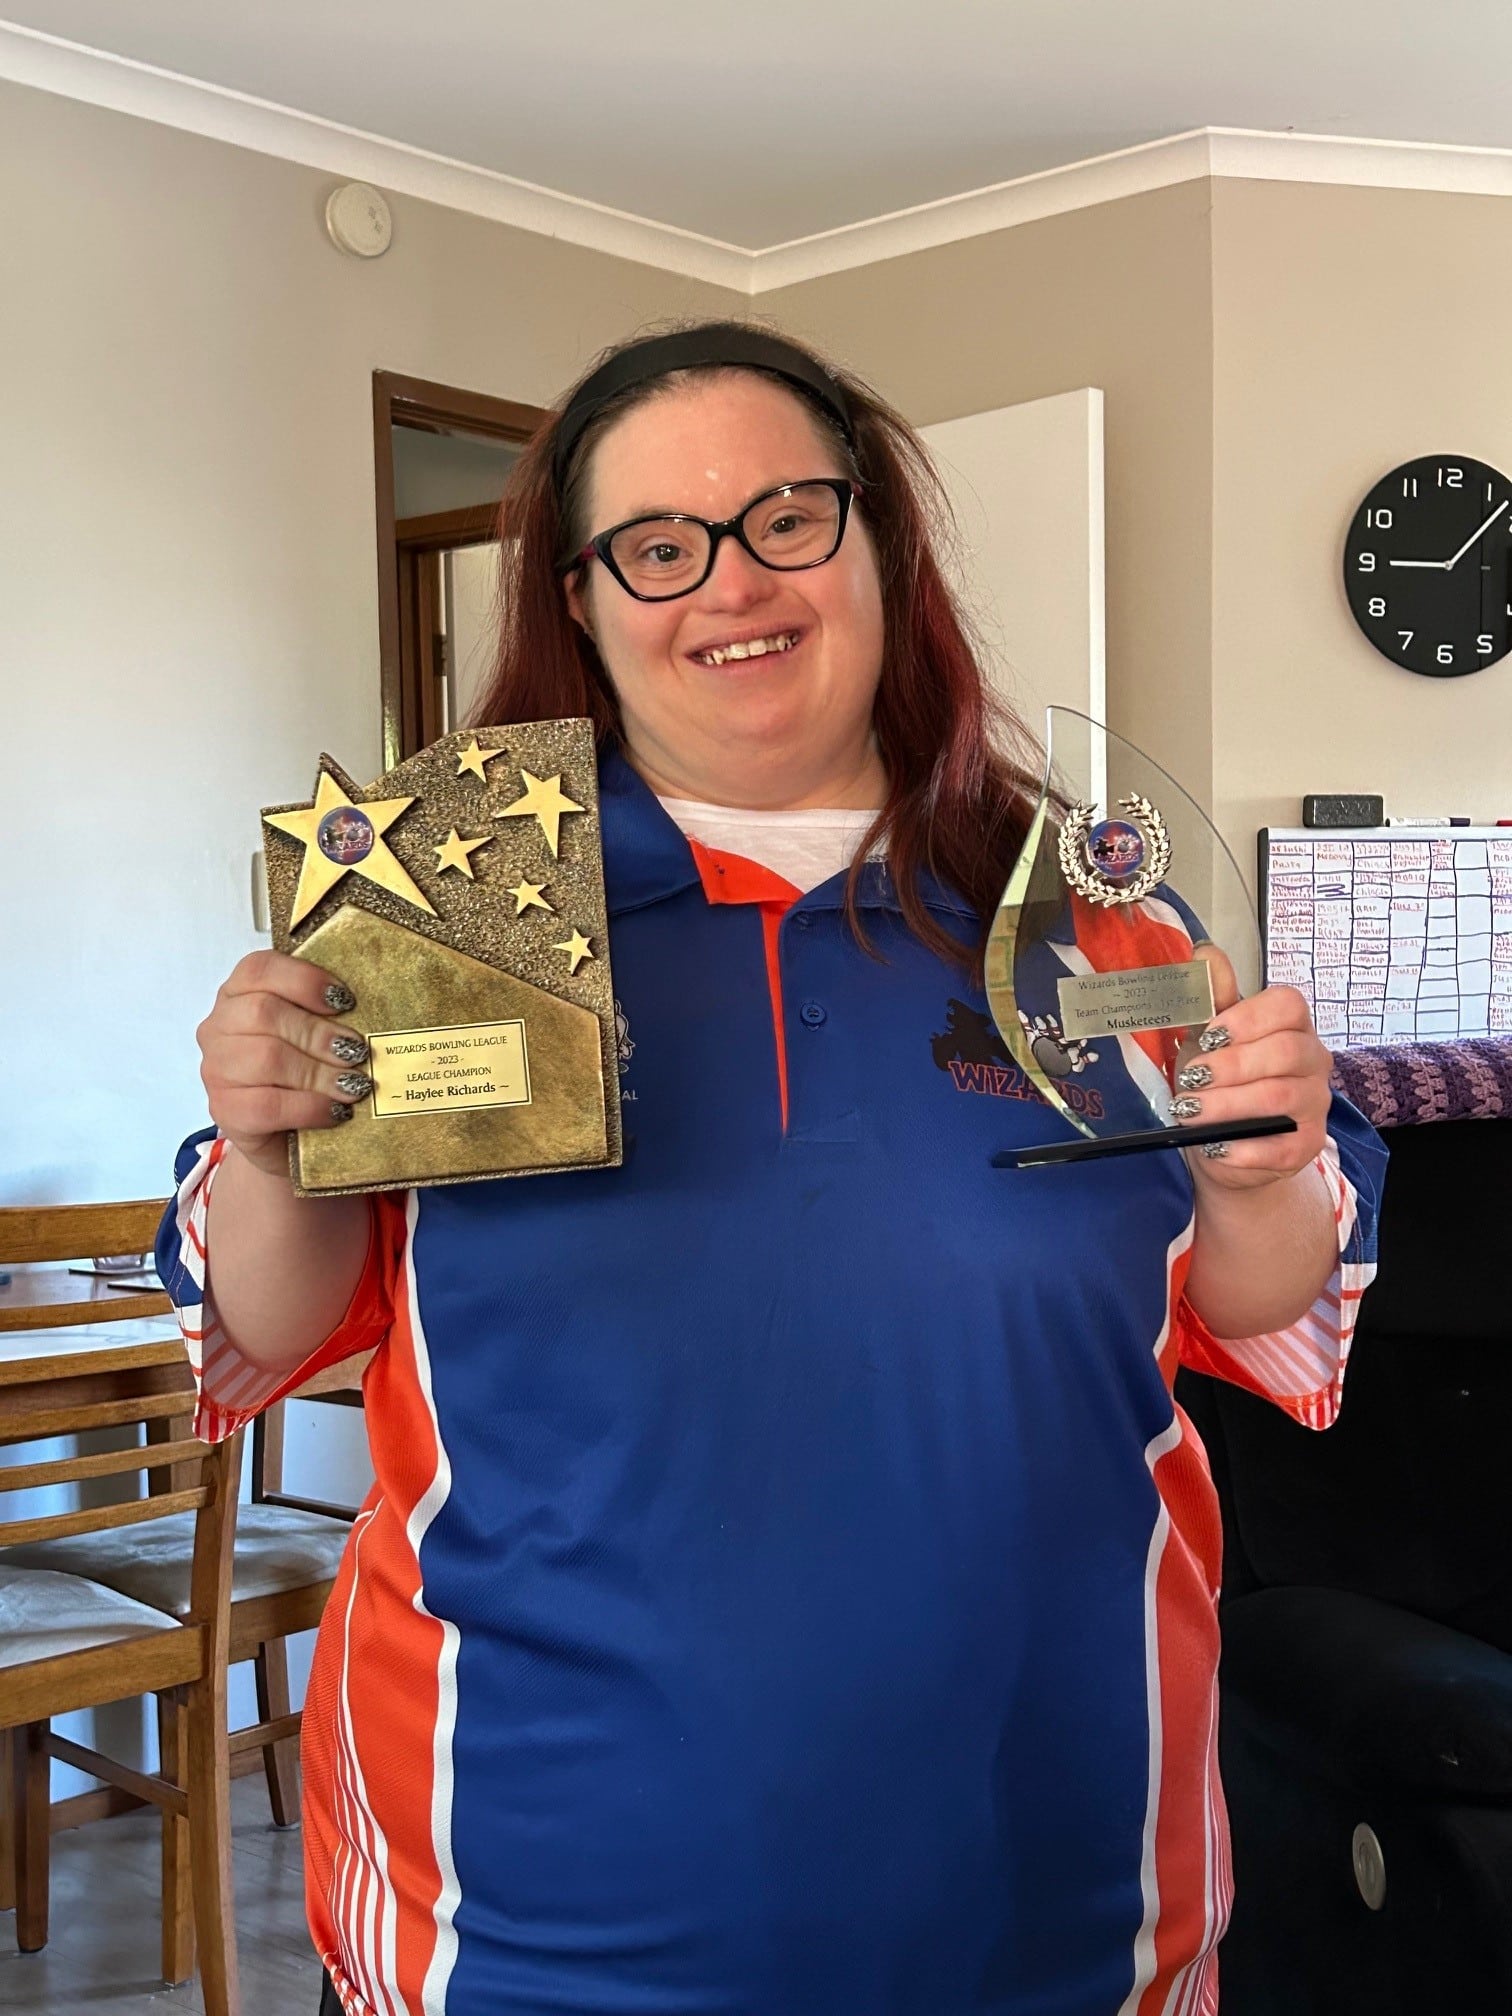 Woman with Down syndrome holding up medal she won for ten-pin bowling